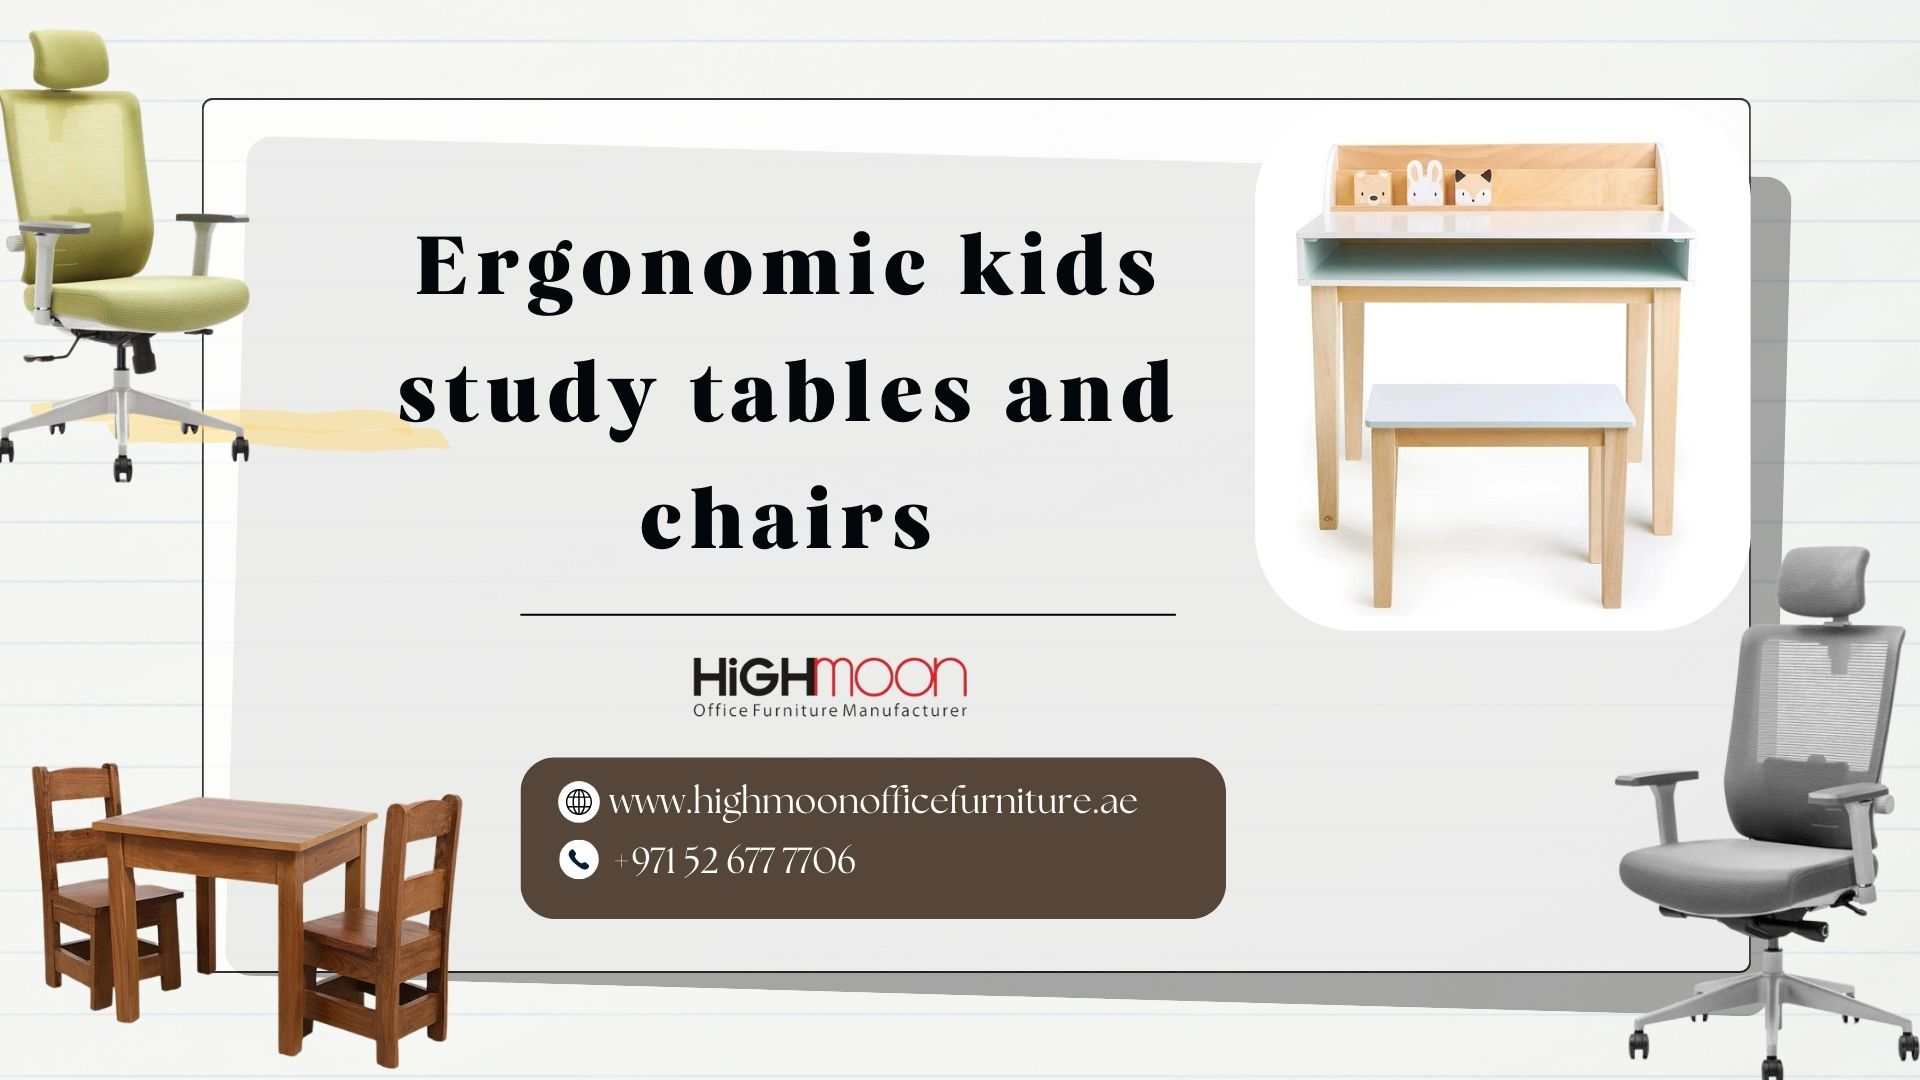 Ergonomic kids study tables and chairs